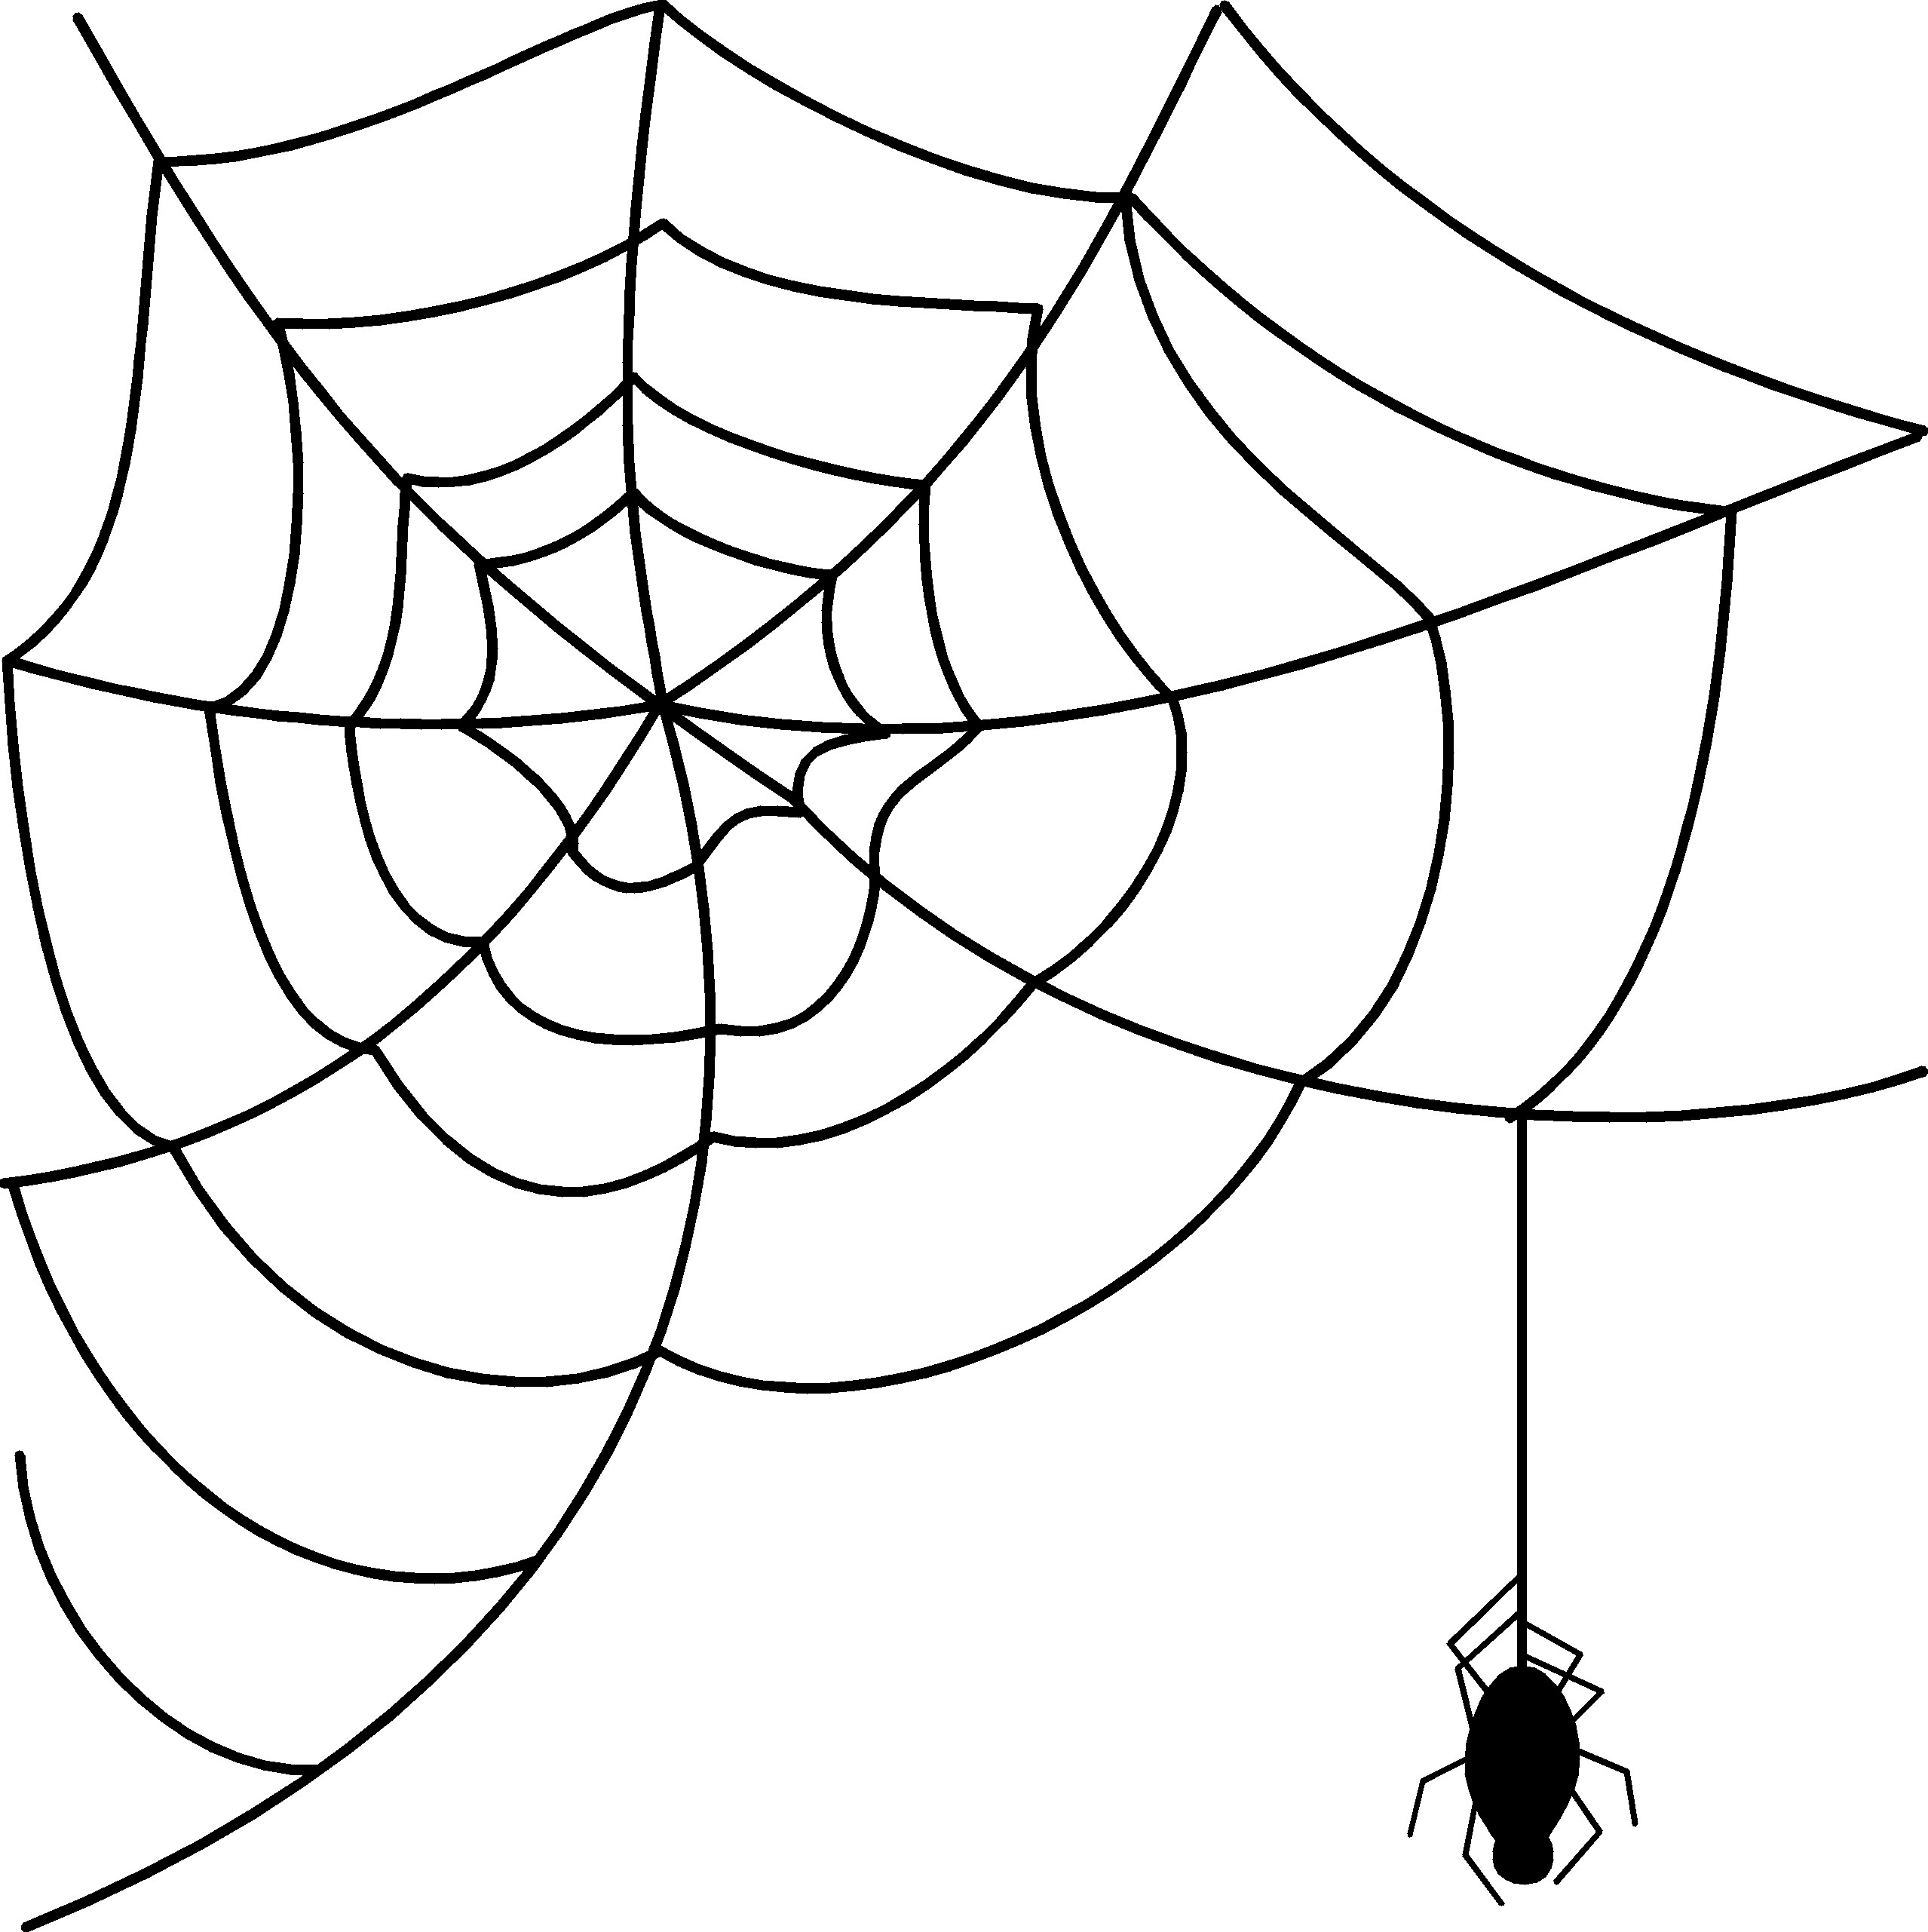 Black spider web with white background clipart png